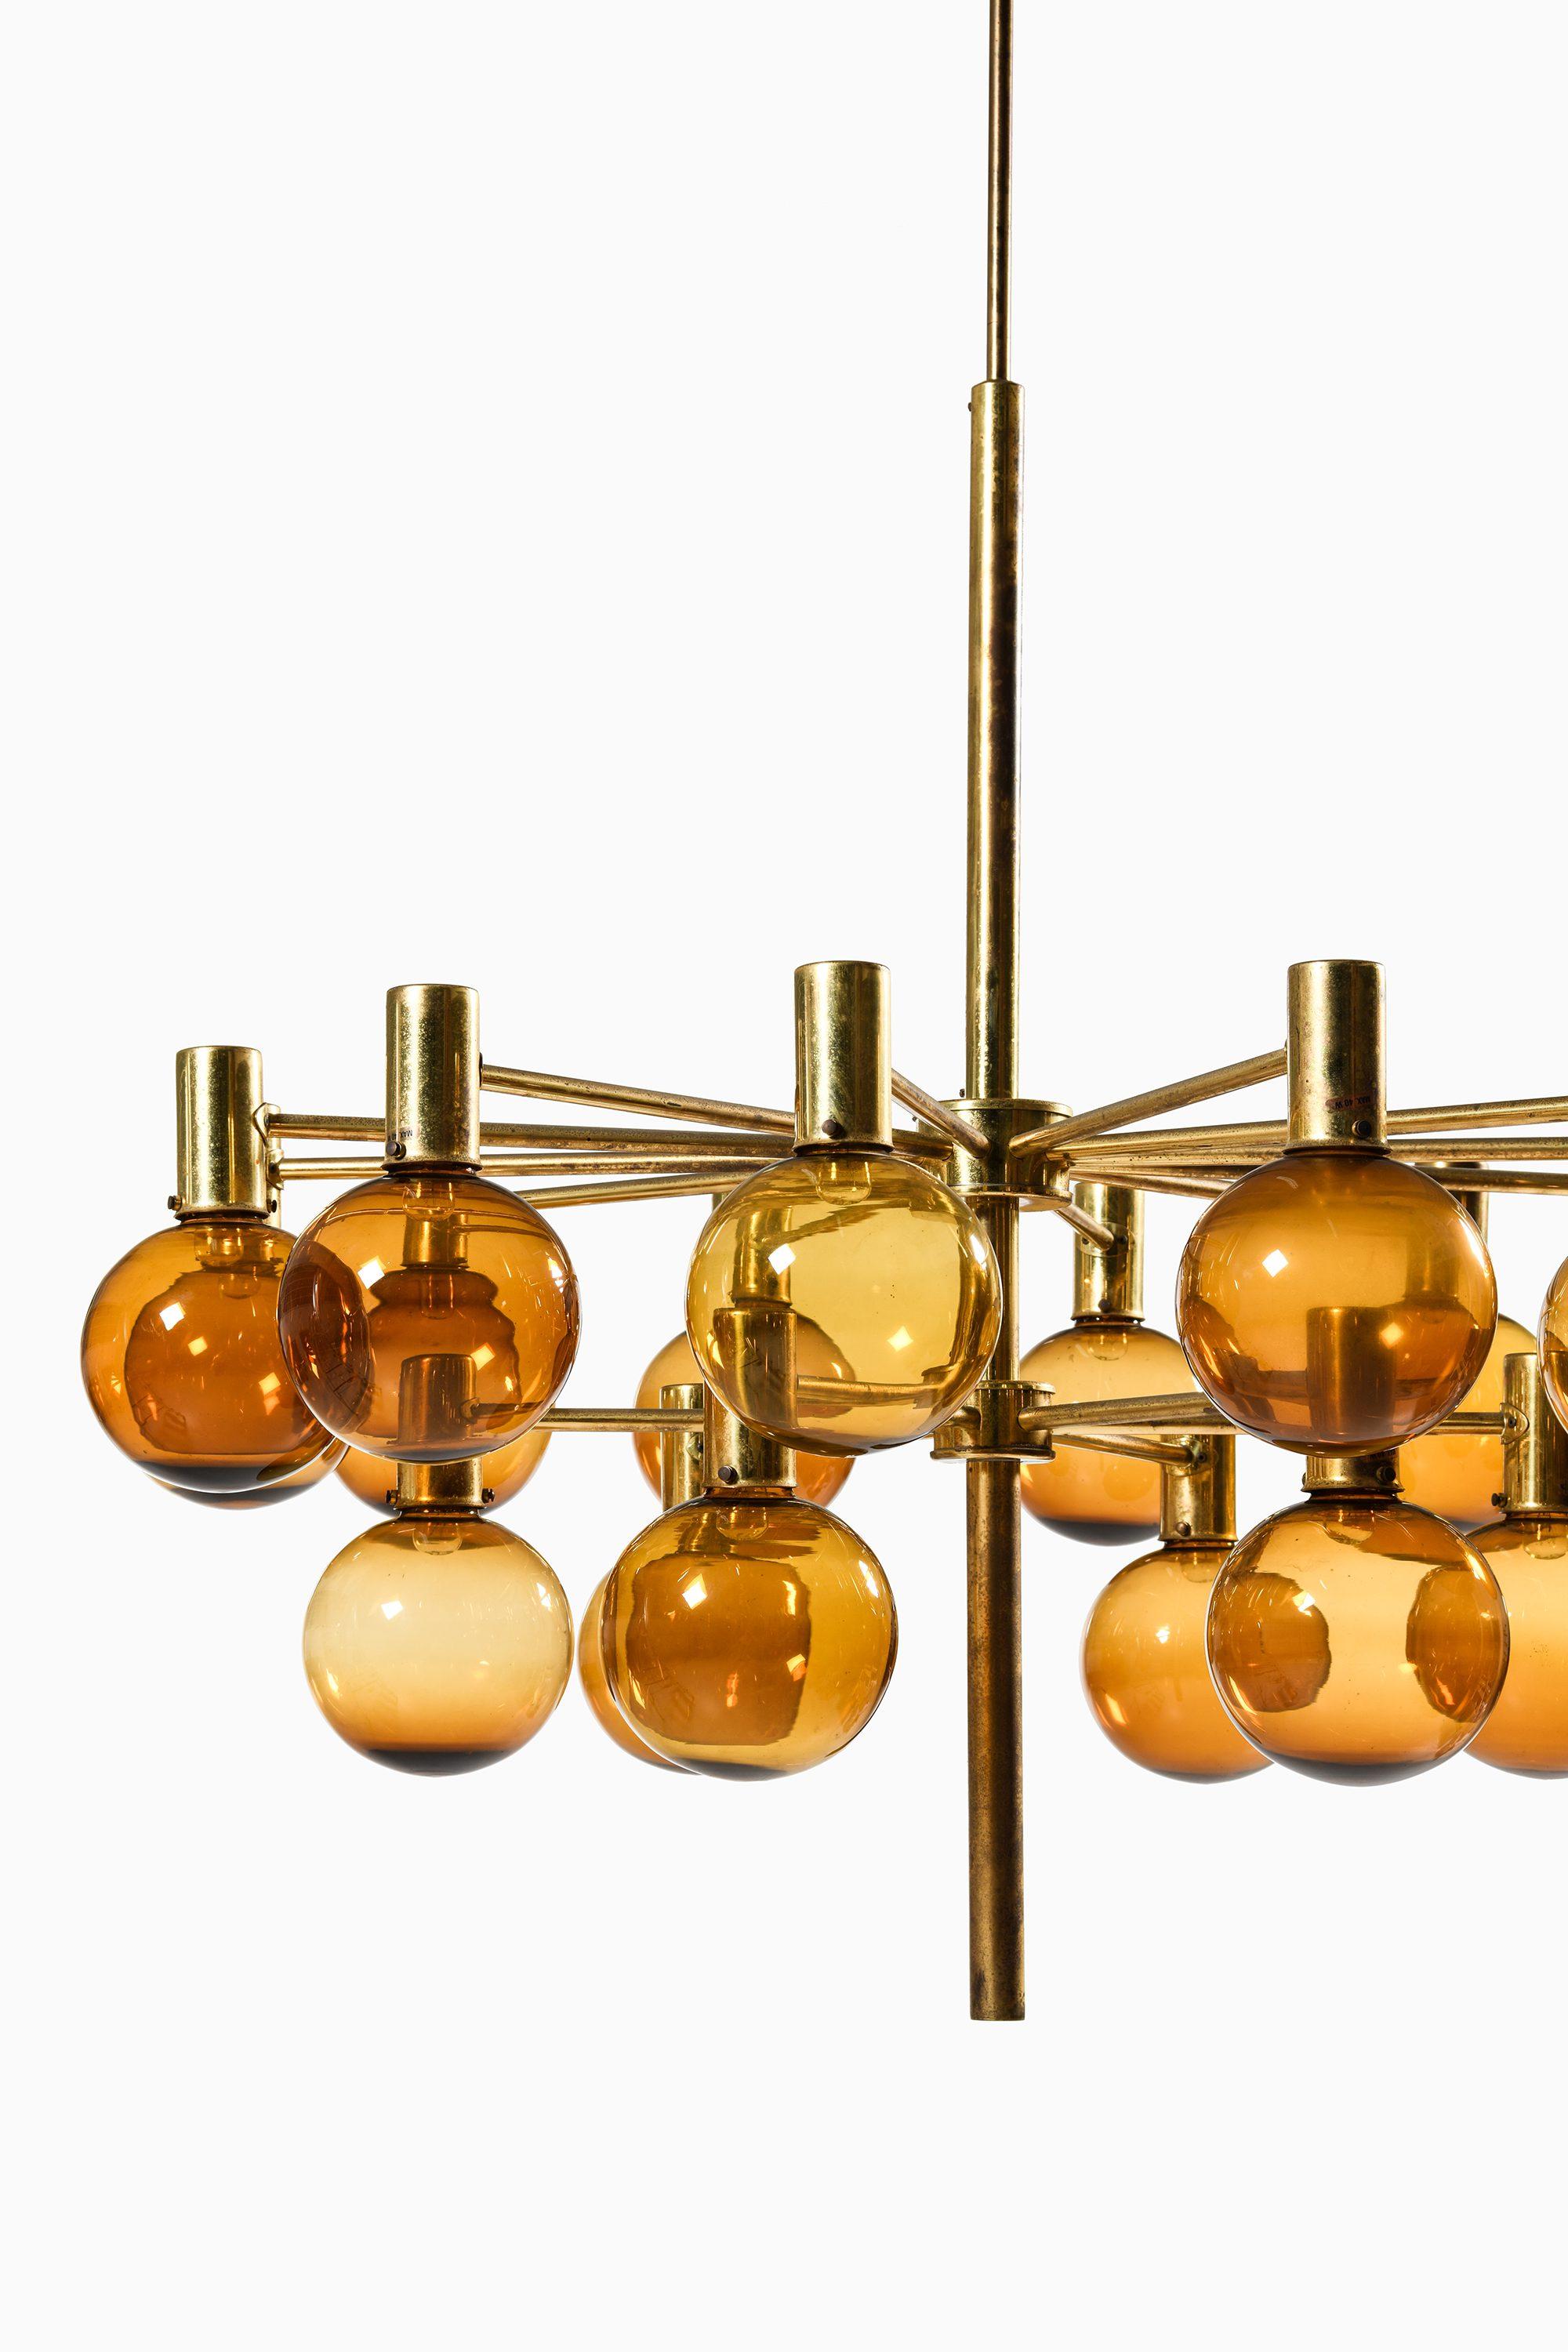 Scandinavian Modern Large Chandelier in Brass and Amber Glass by Hans-Agne Jakobsson, 1950's For Sale